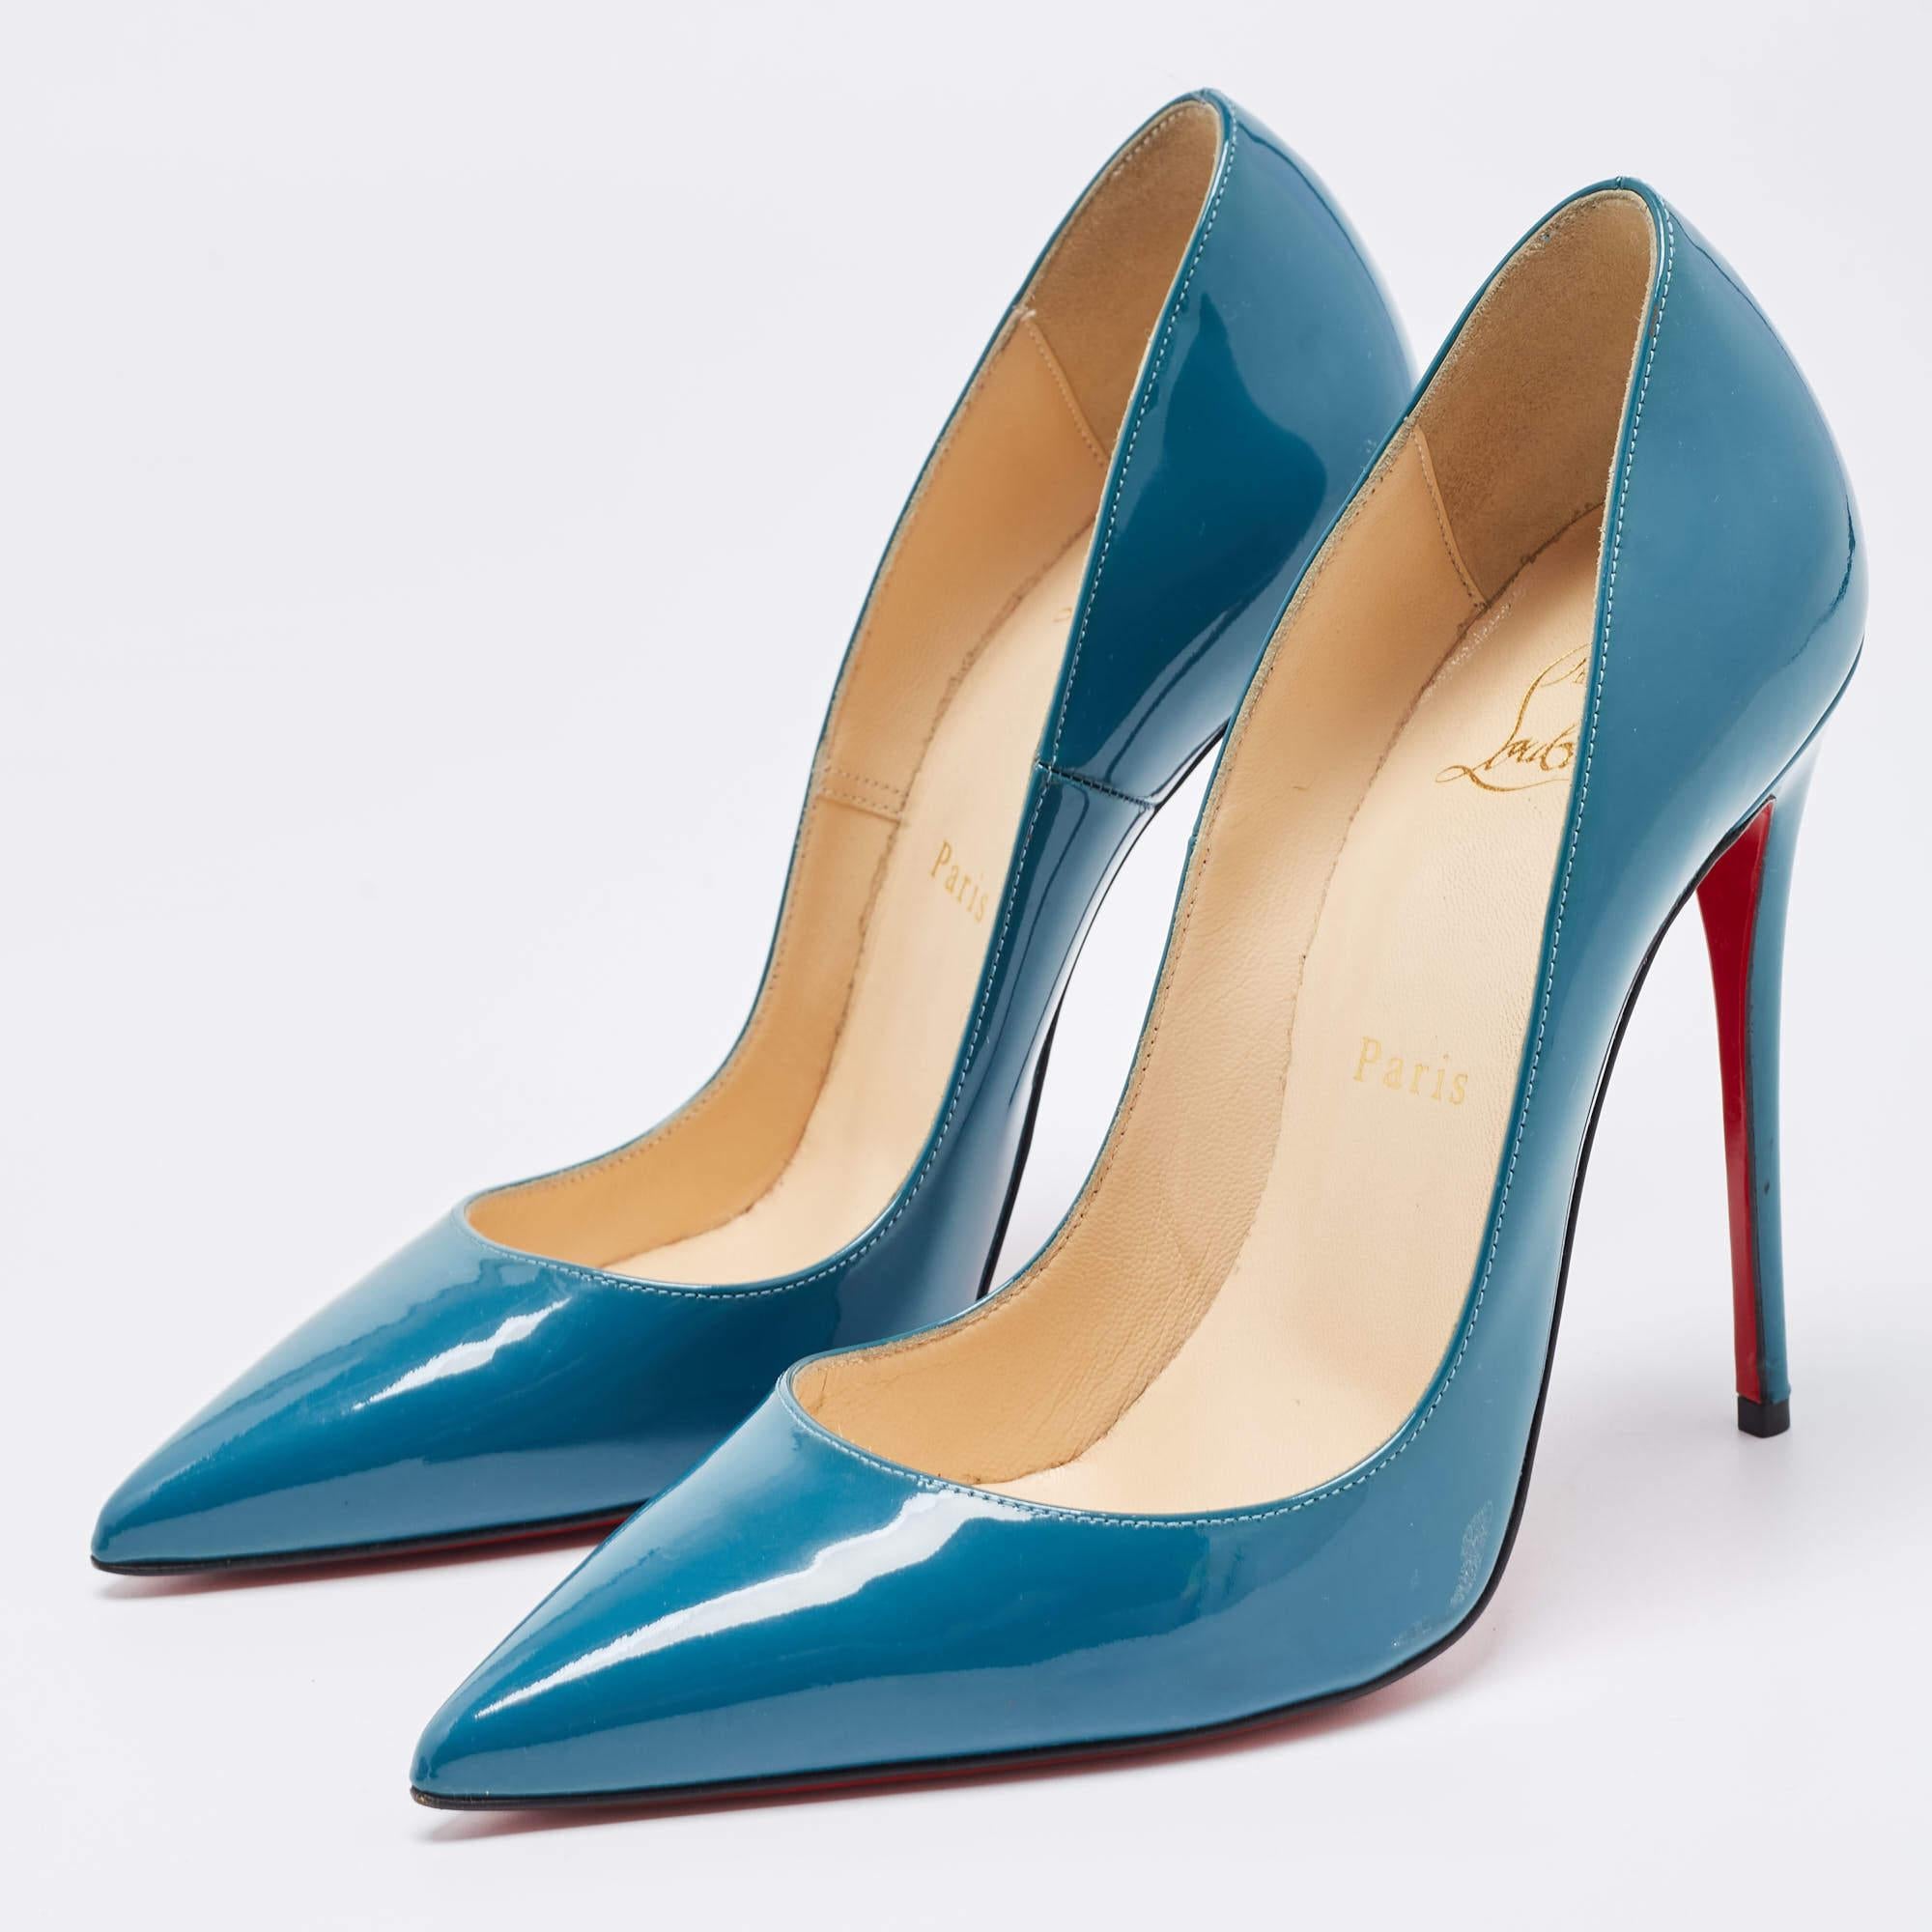 Christian Louboutin Teal Patent Leather So Kate Pumps Size 37.5 1